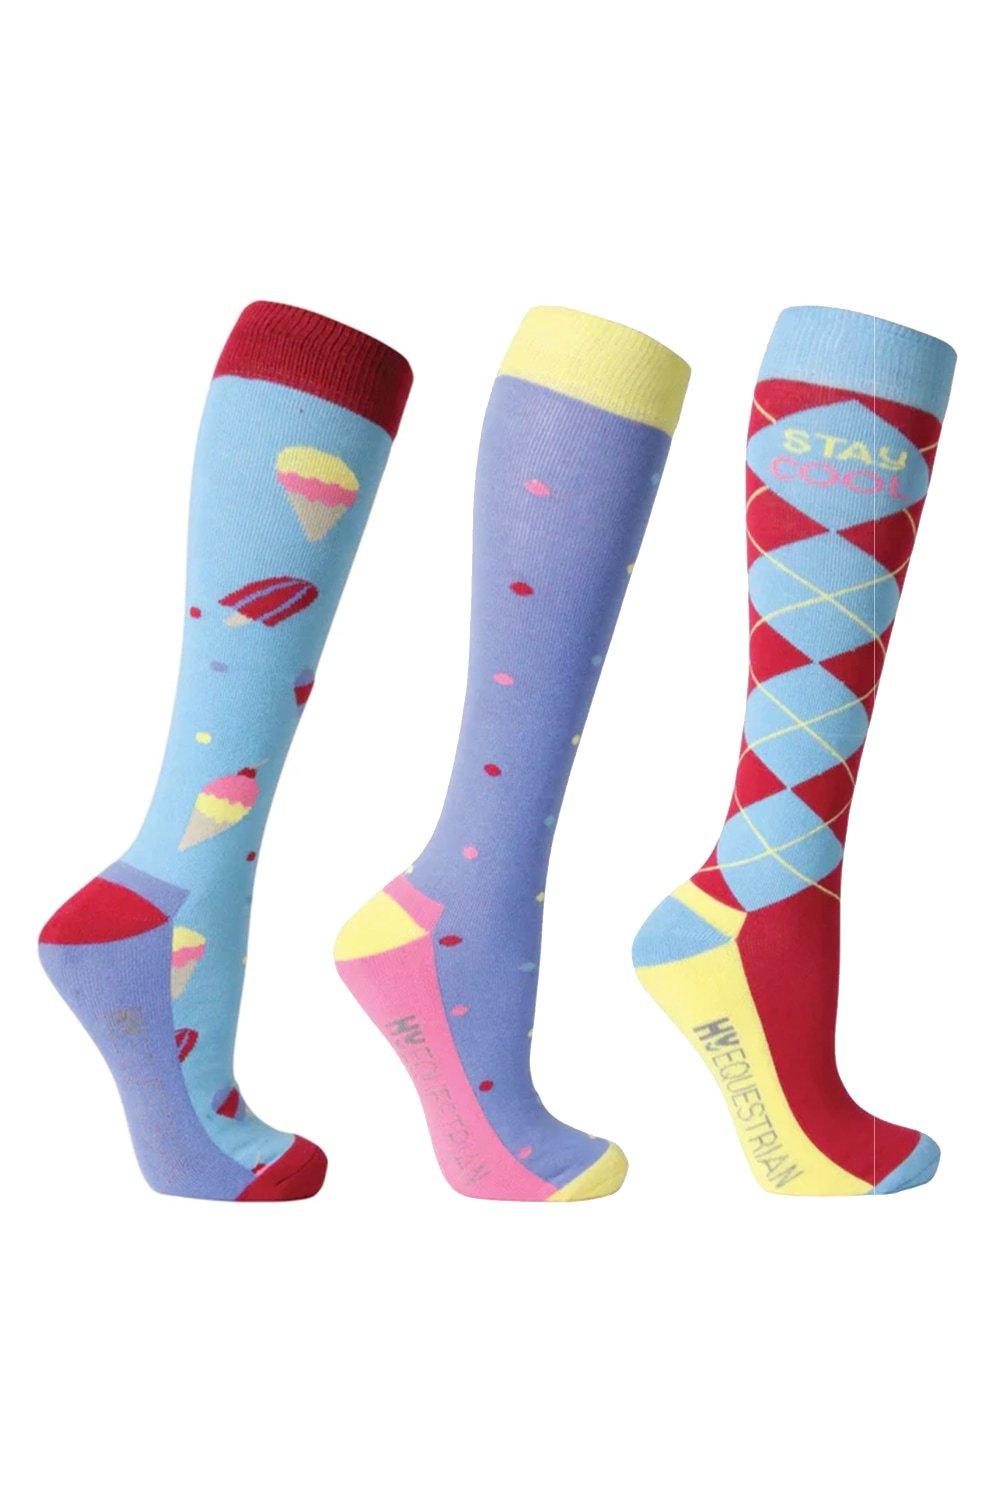 Stay Cool Socks (Pack of 3)